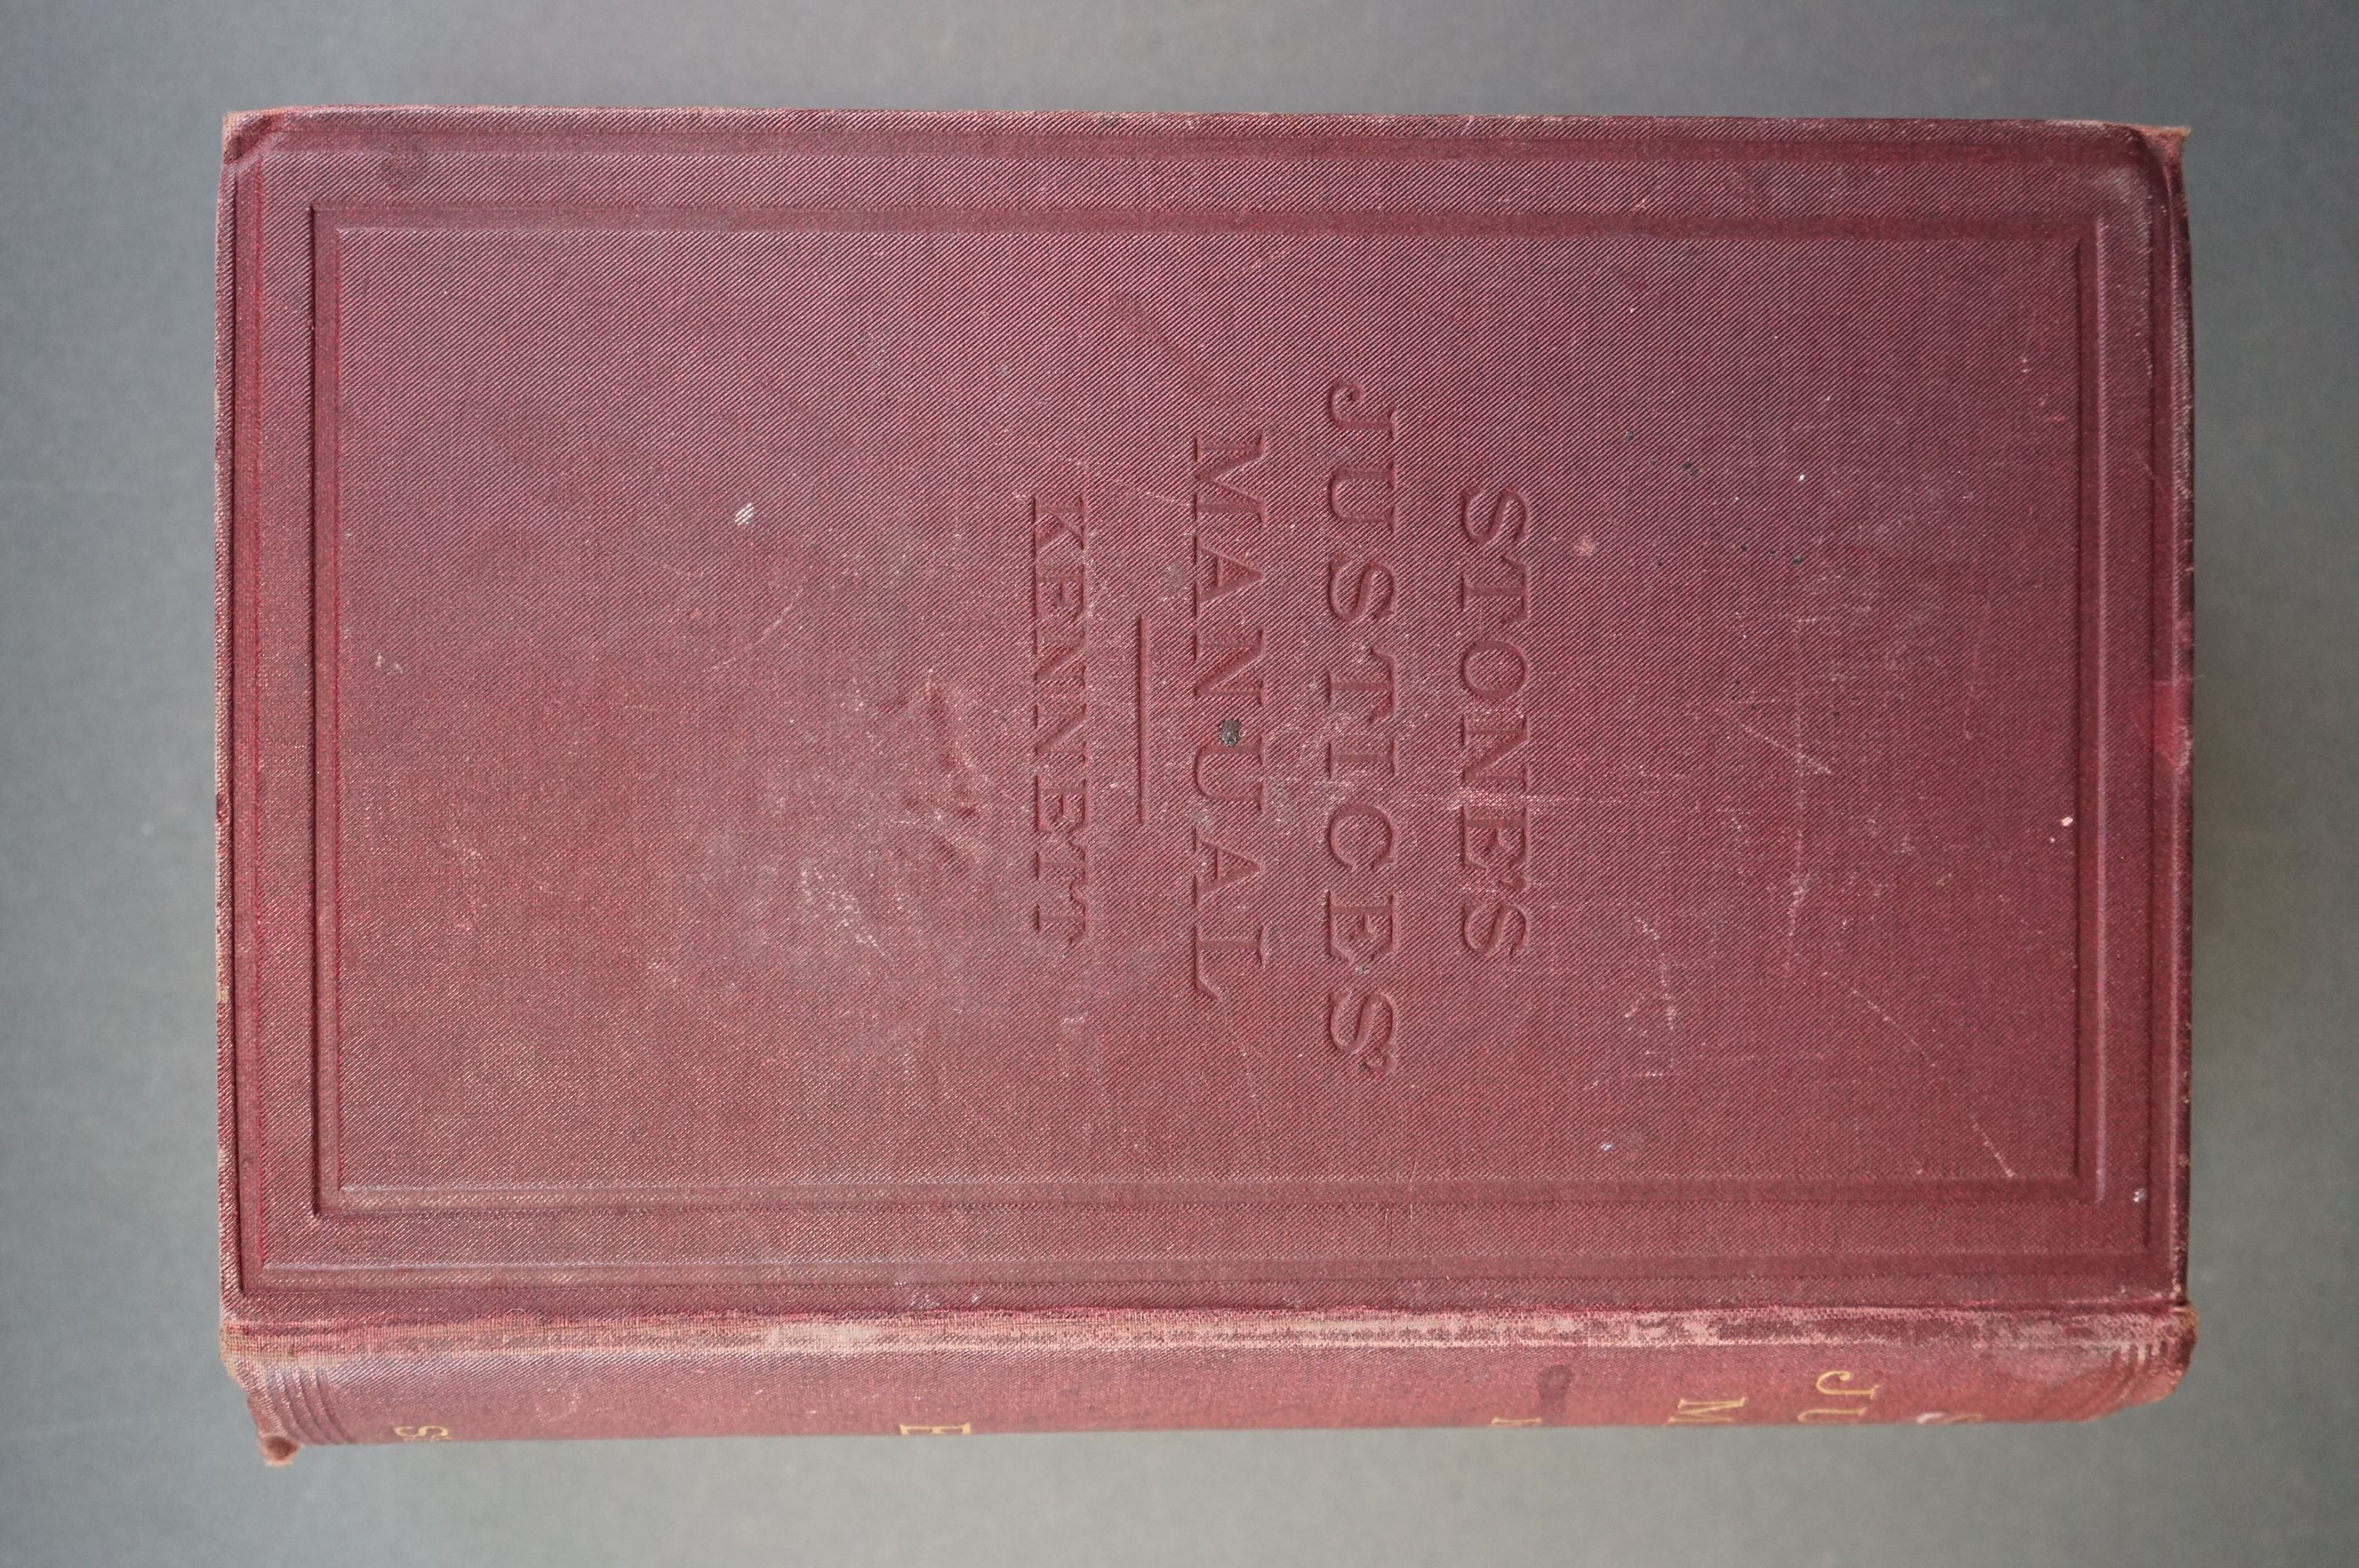 Book - Stone's Justices' Manual dated 1889, published by Shaw & Sons, Fetter Lane, Fleet Street - Image 5 of 8